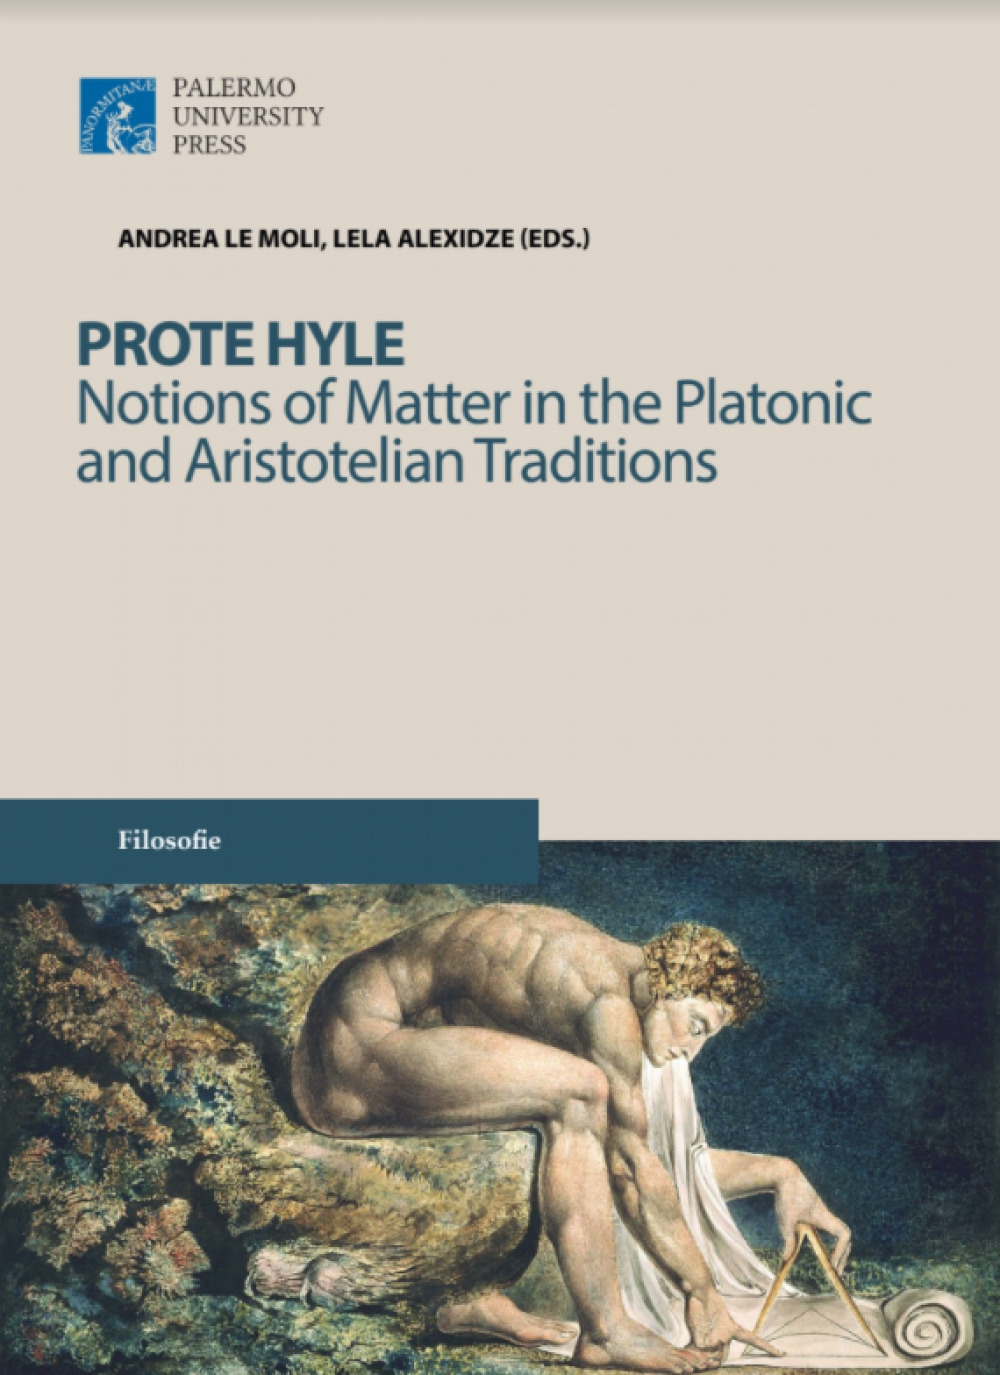 Prote hyle. Notions of matter in the platonic and aristotelian traditions